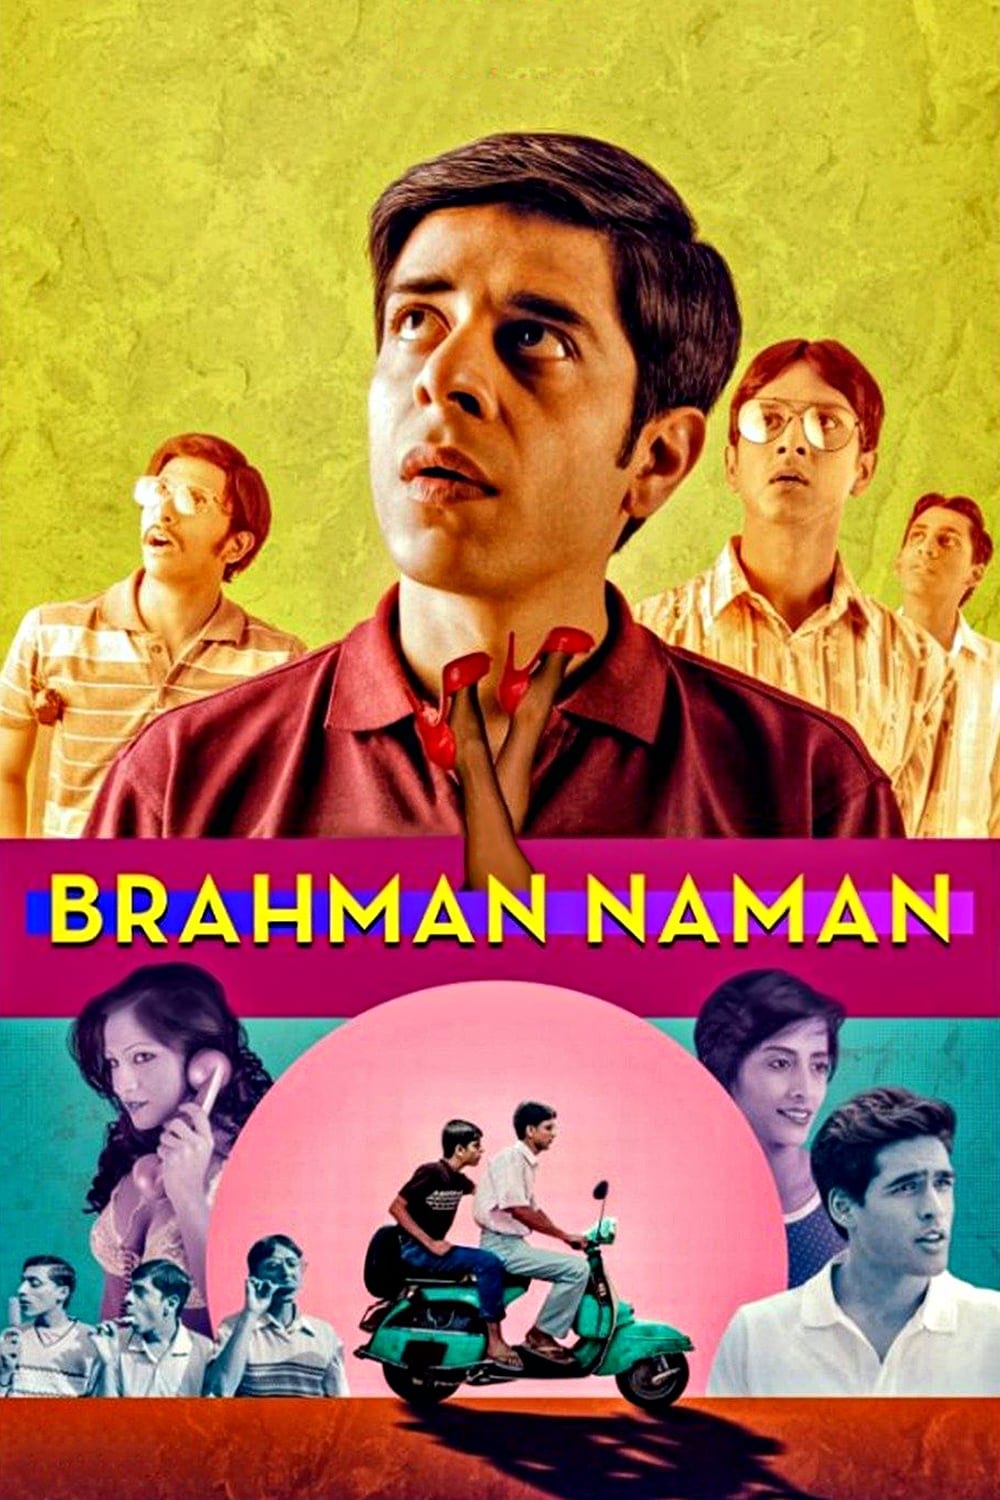 Poster for the movie "Brahman Naman"